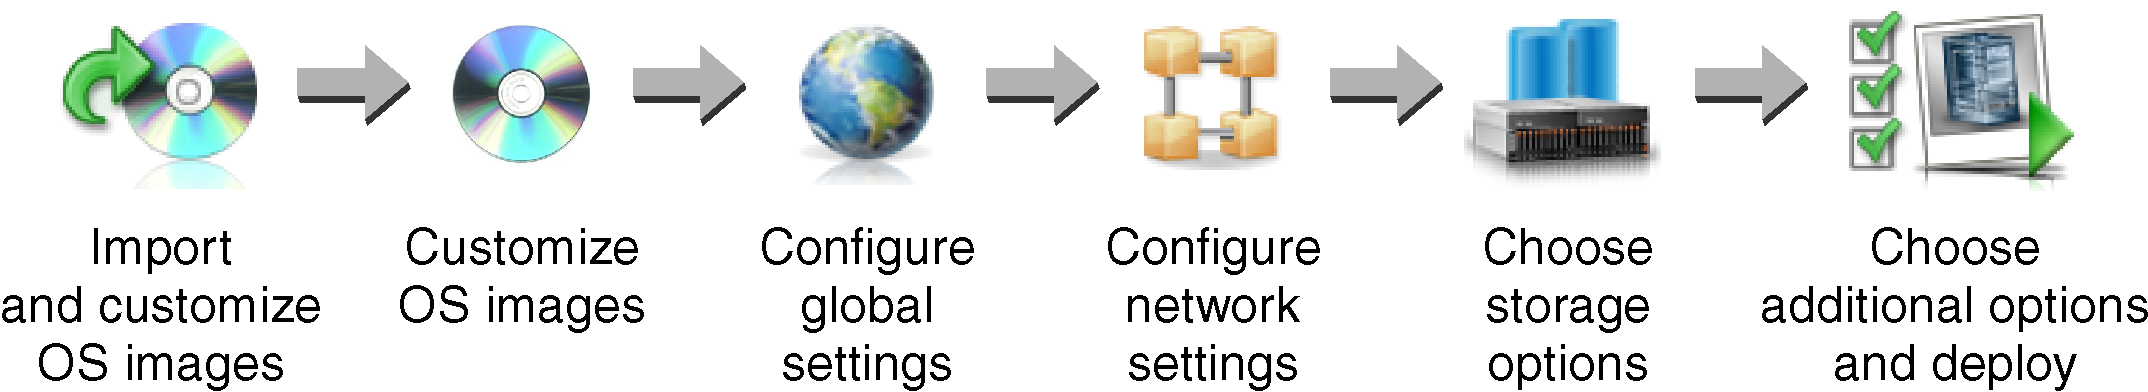 Illustrates the steps involved in managing and deploying operating system images, including importing and customizing OS images, configuring global settings, configuring network settings, configuring the storage location, and deploying images.